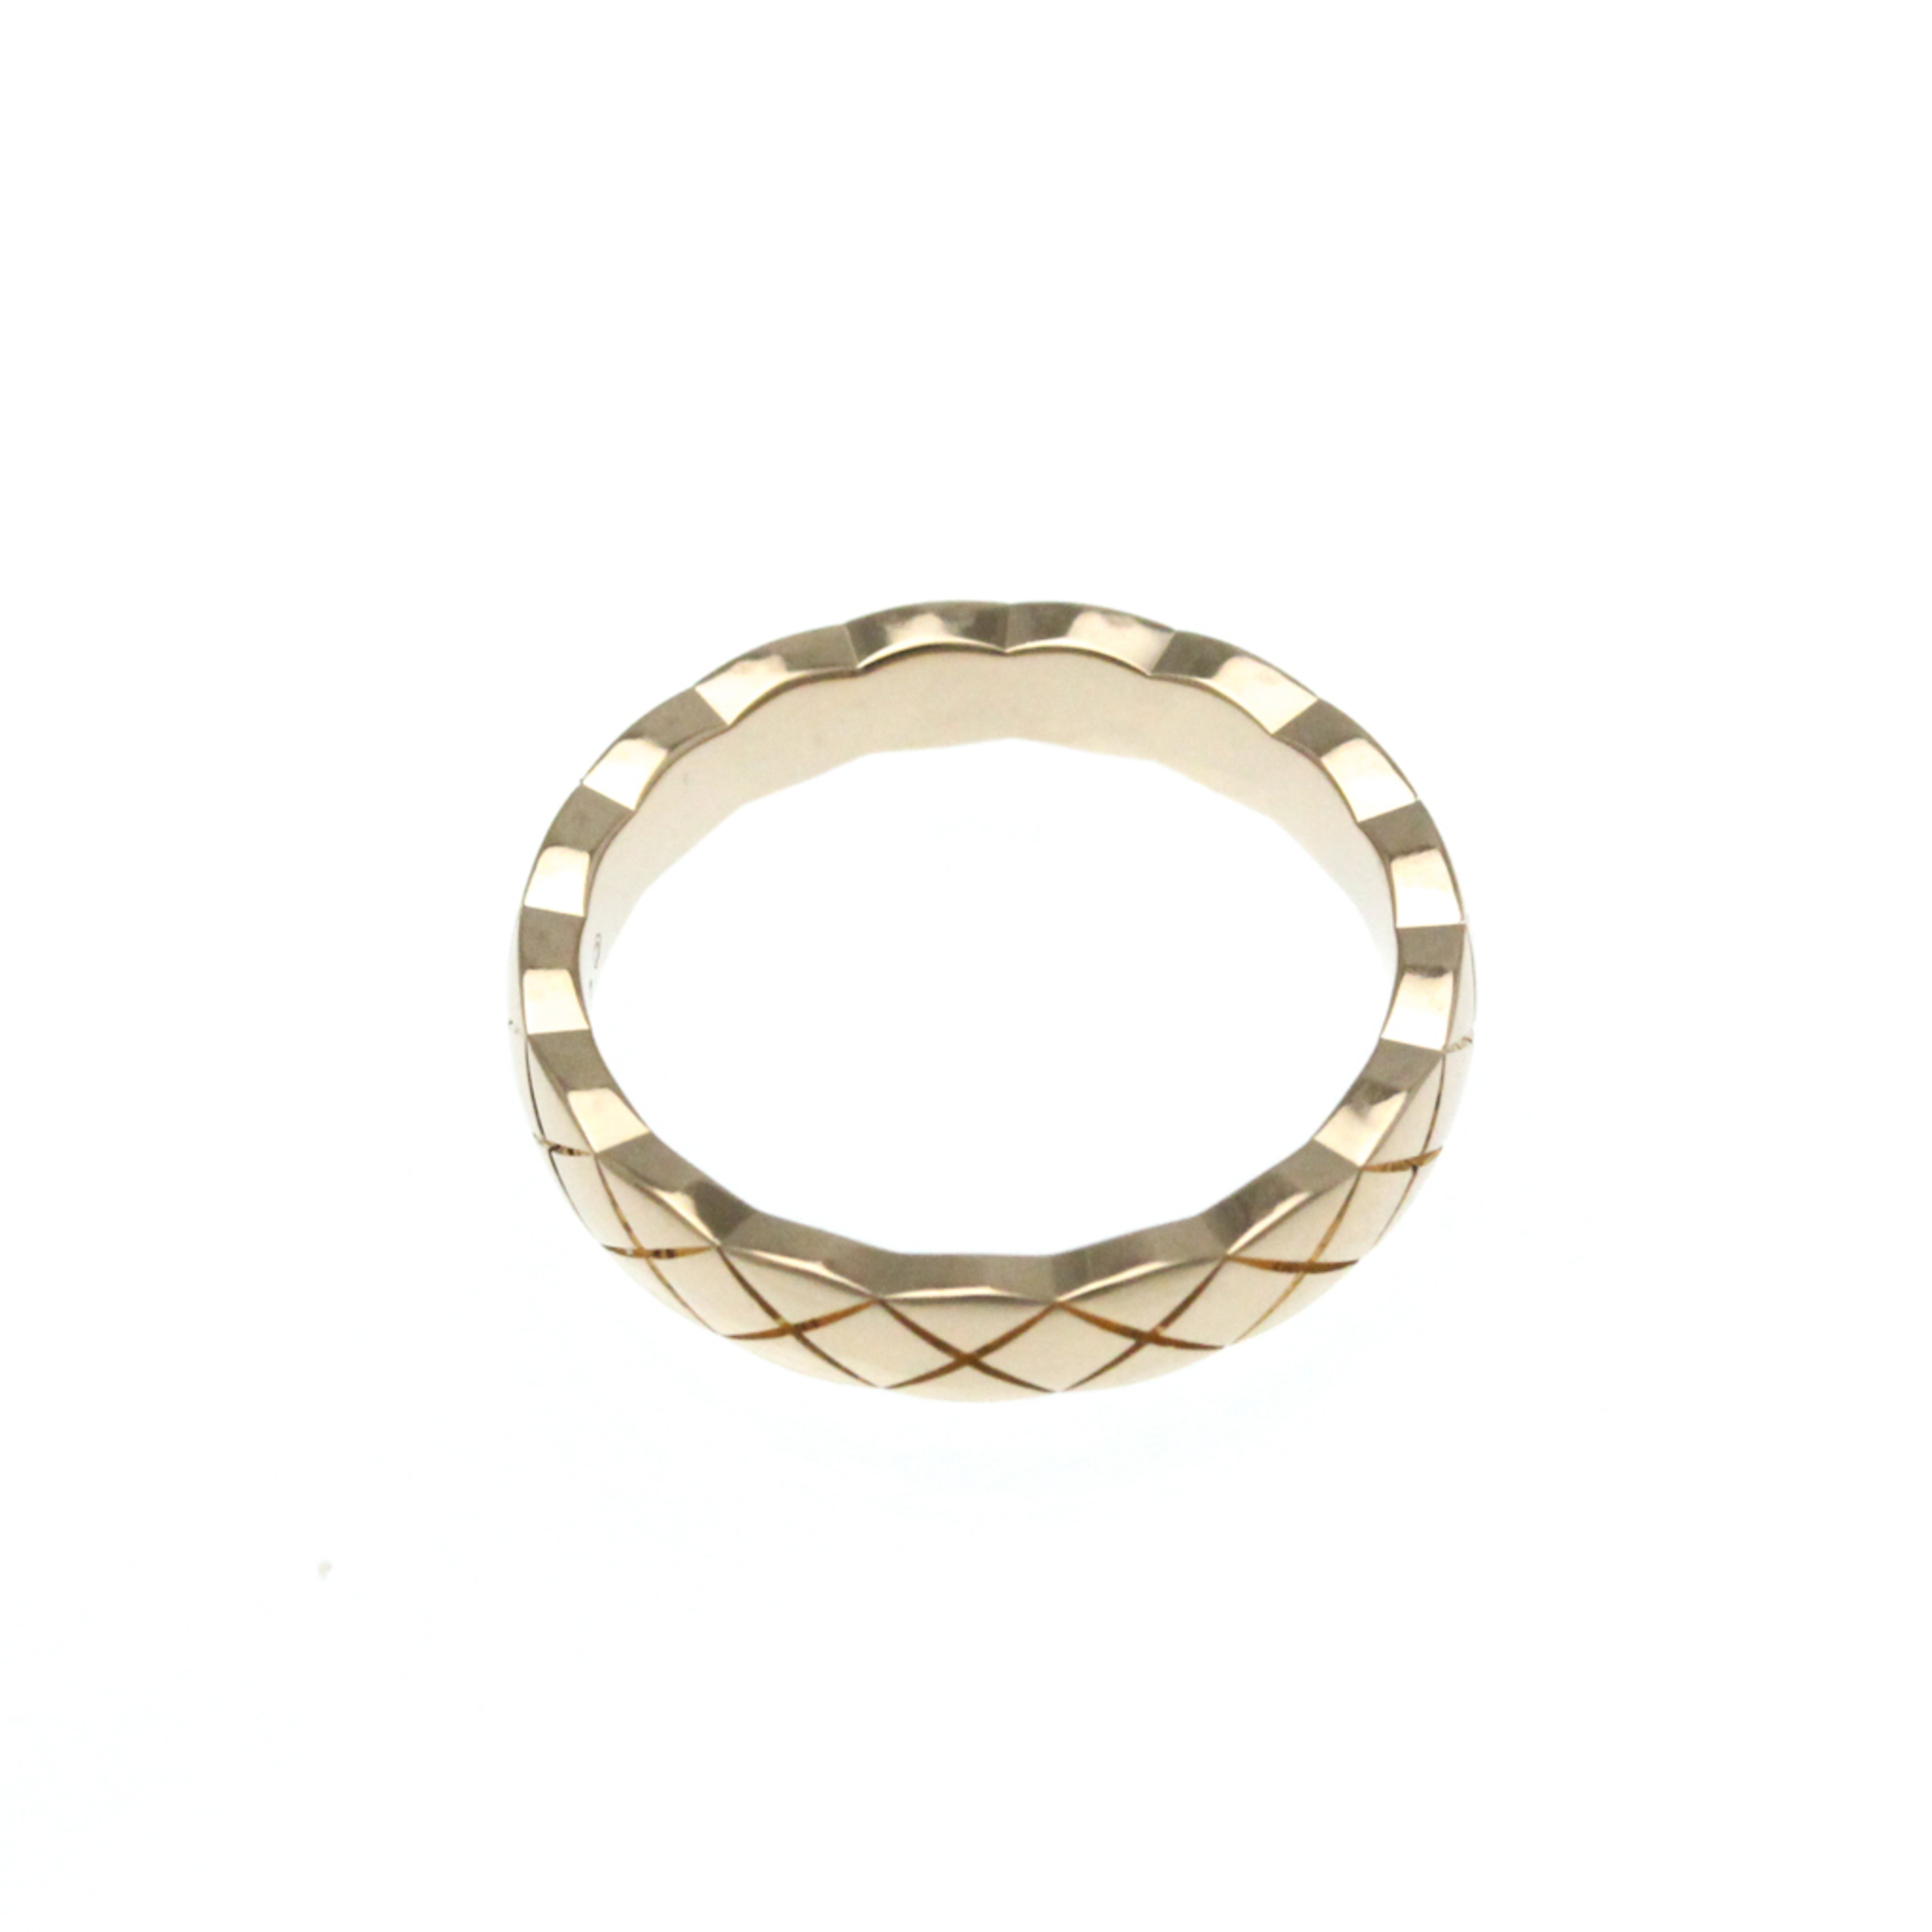 Chanel Coco Crush Ring Mini Model Pink Gold (18K) Fashion No Stone Band Ring Pink Gold